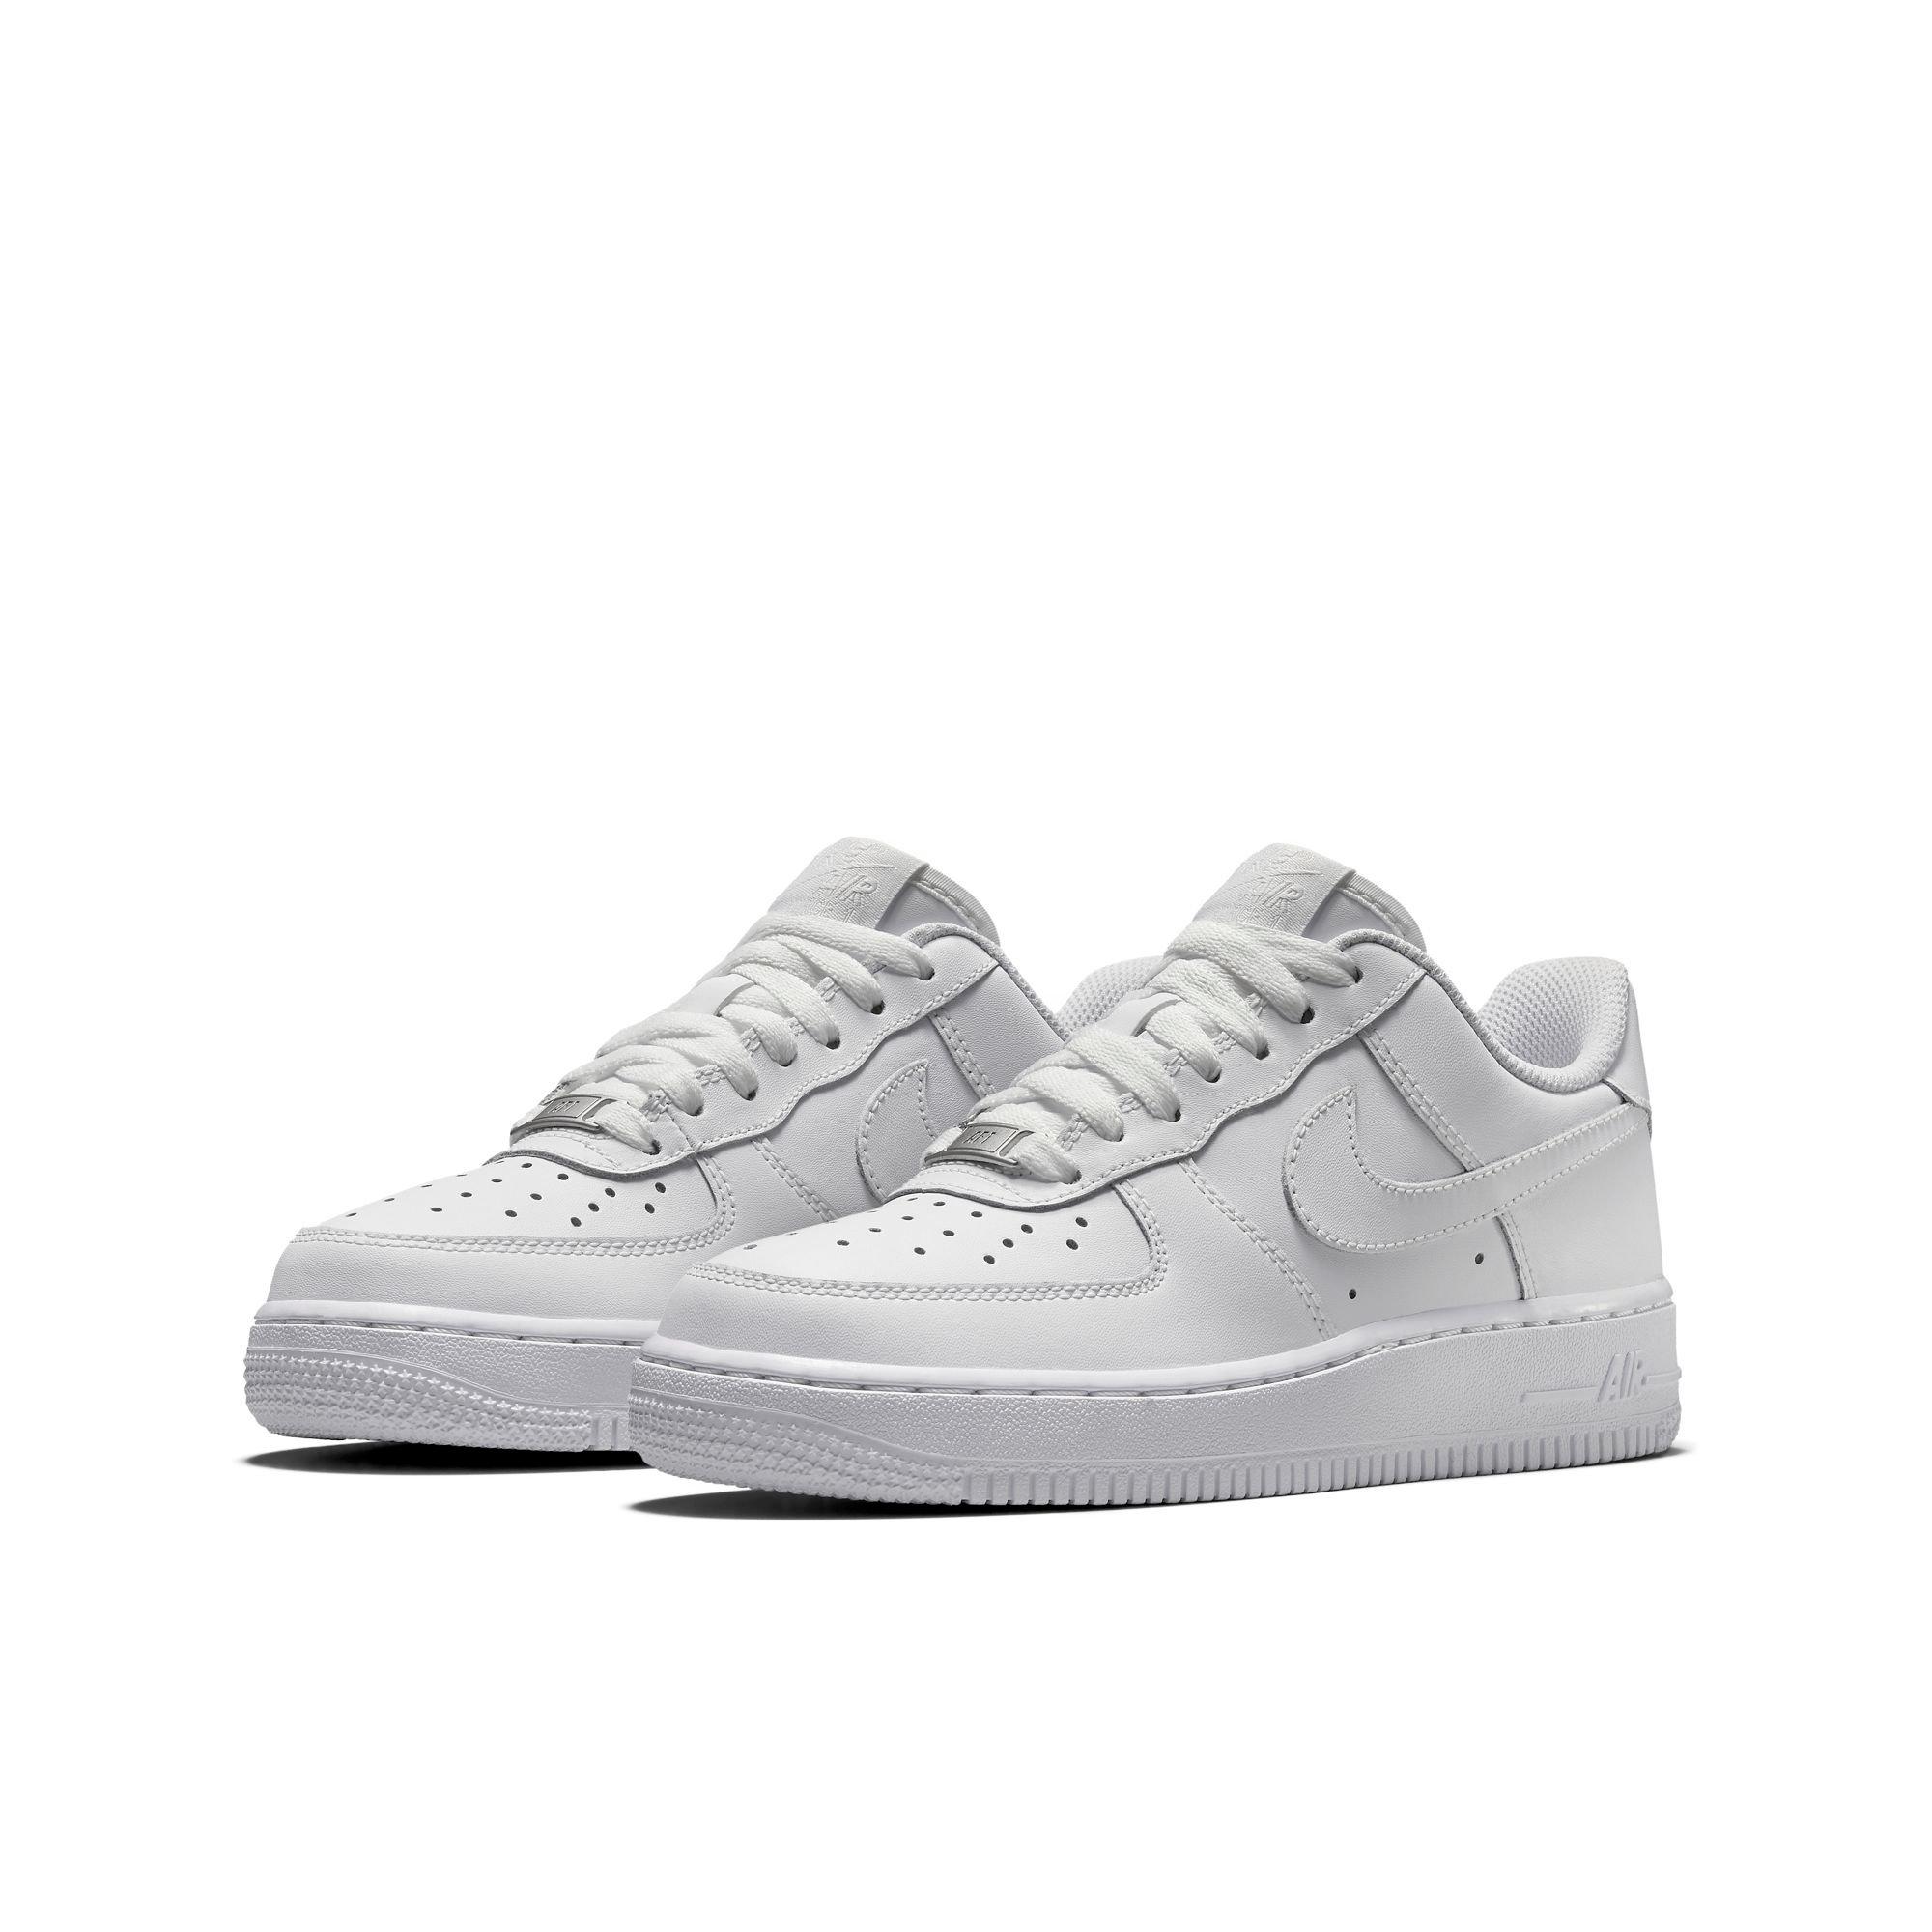 air force 1 gs meaning